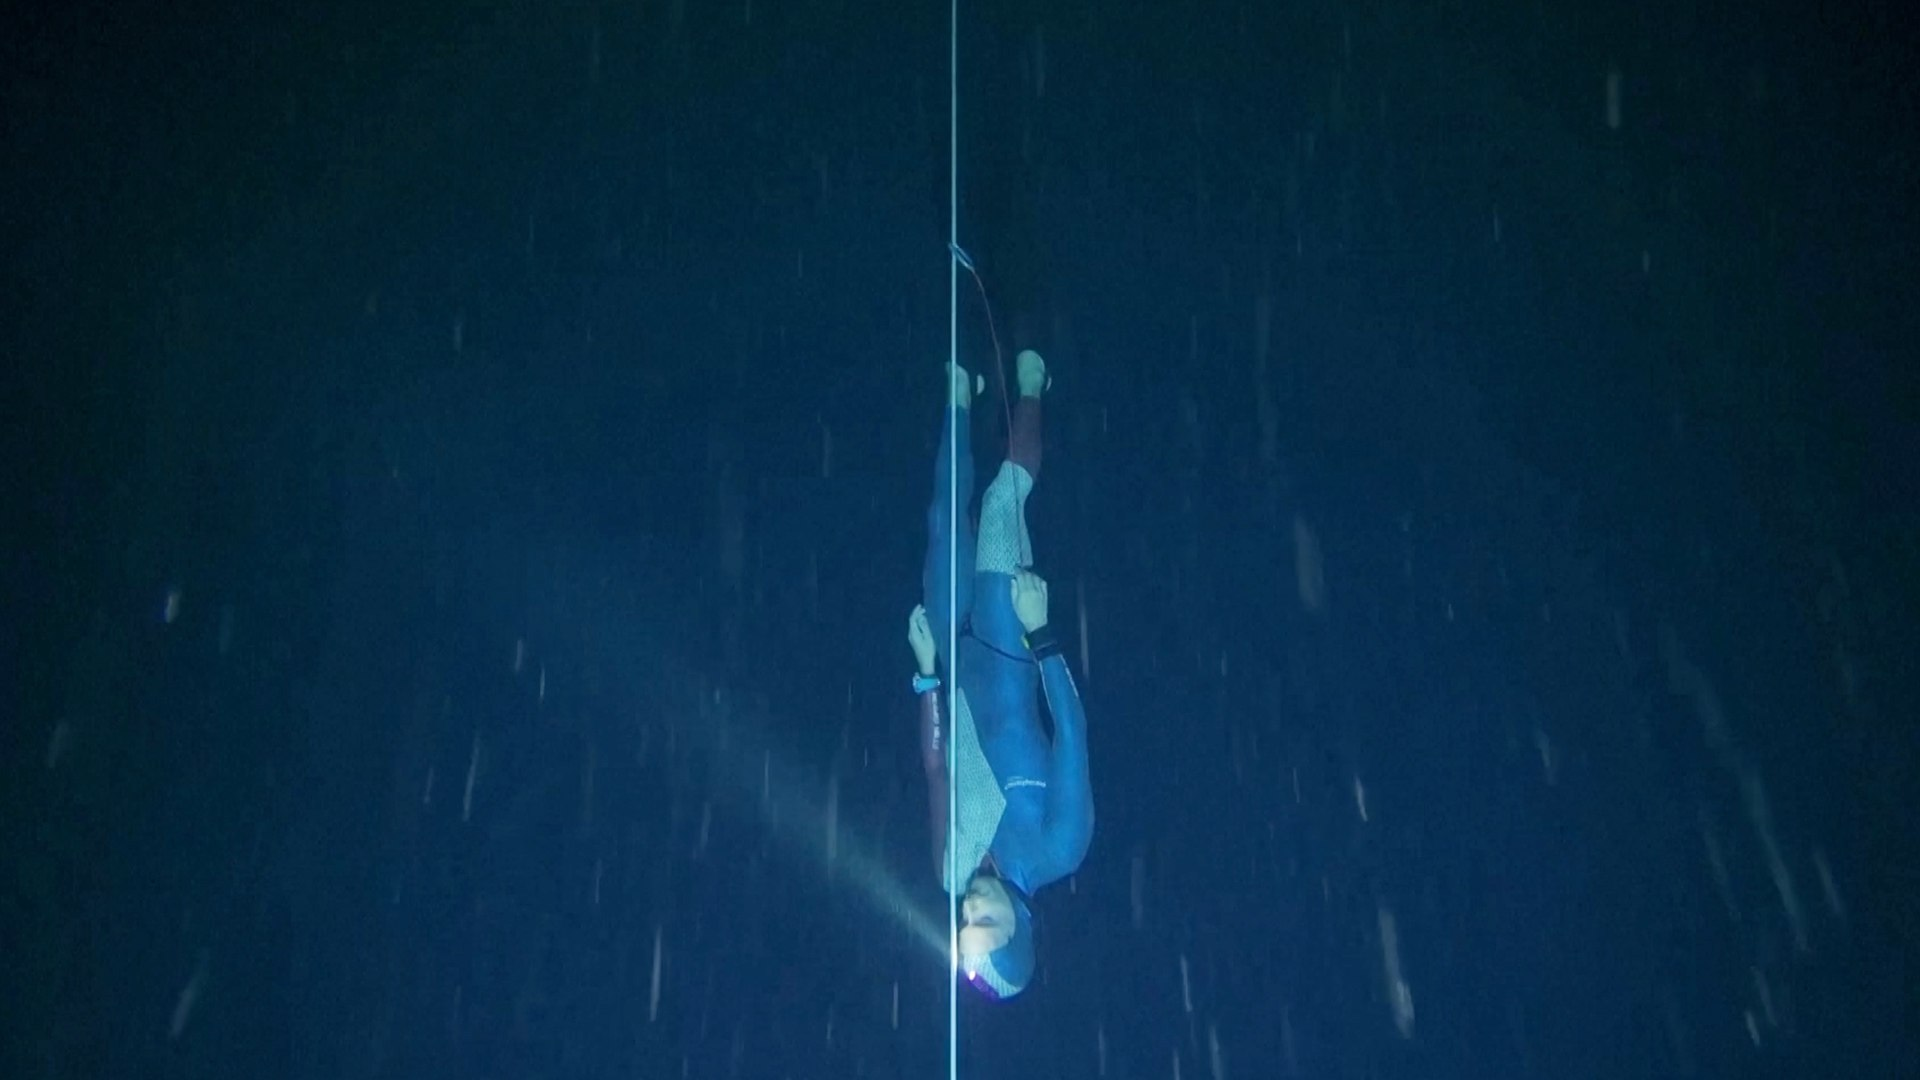 ESS: French freediver breaks world record with 120-metre descent